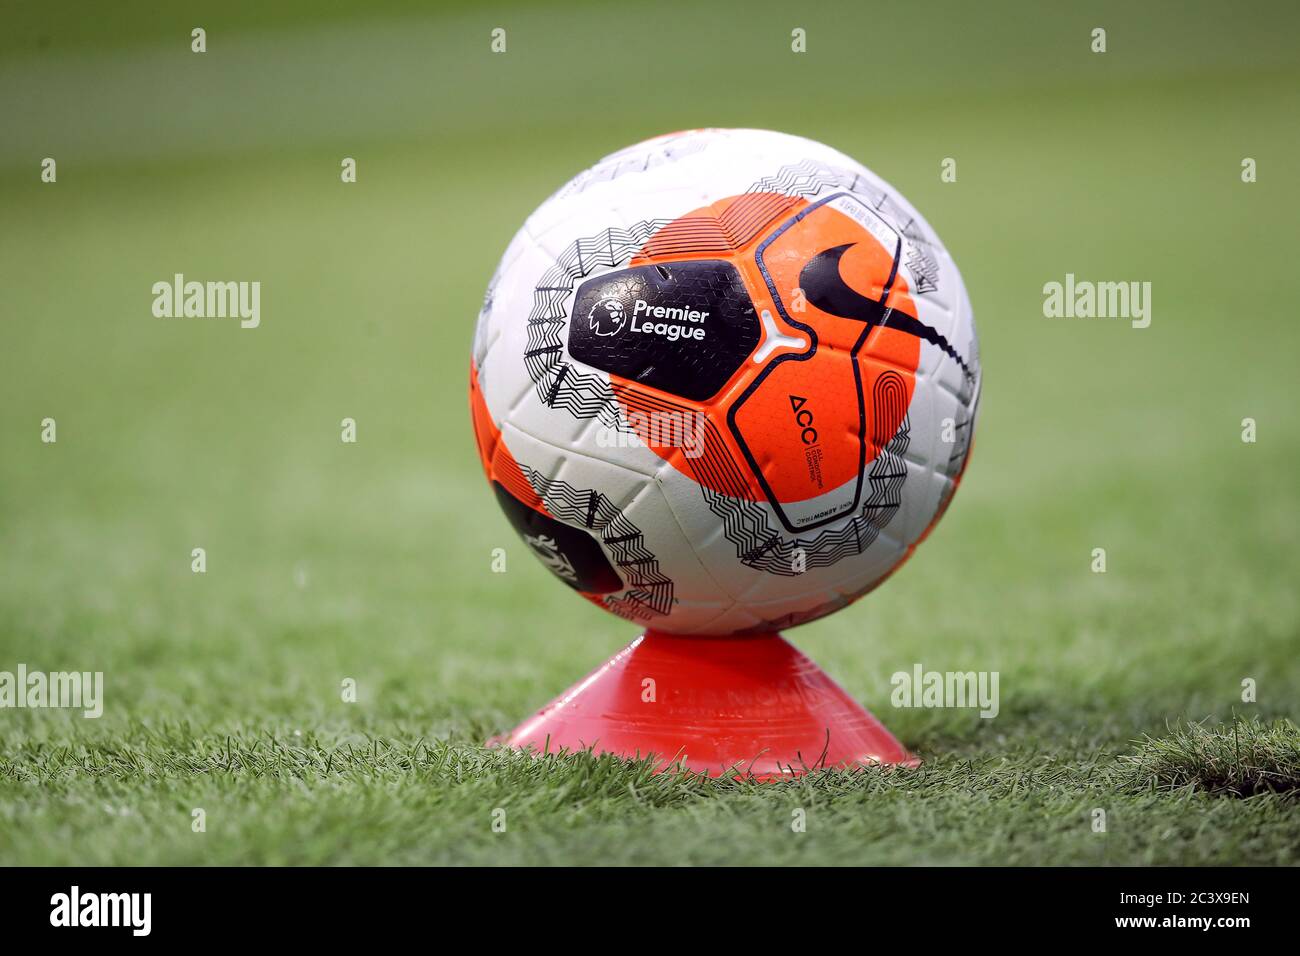 Nike Merlin match ball during the Premier League match at the Etihad  Stadium, Manchester Stock Photo - Alamy